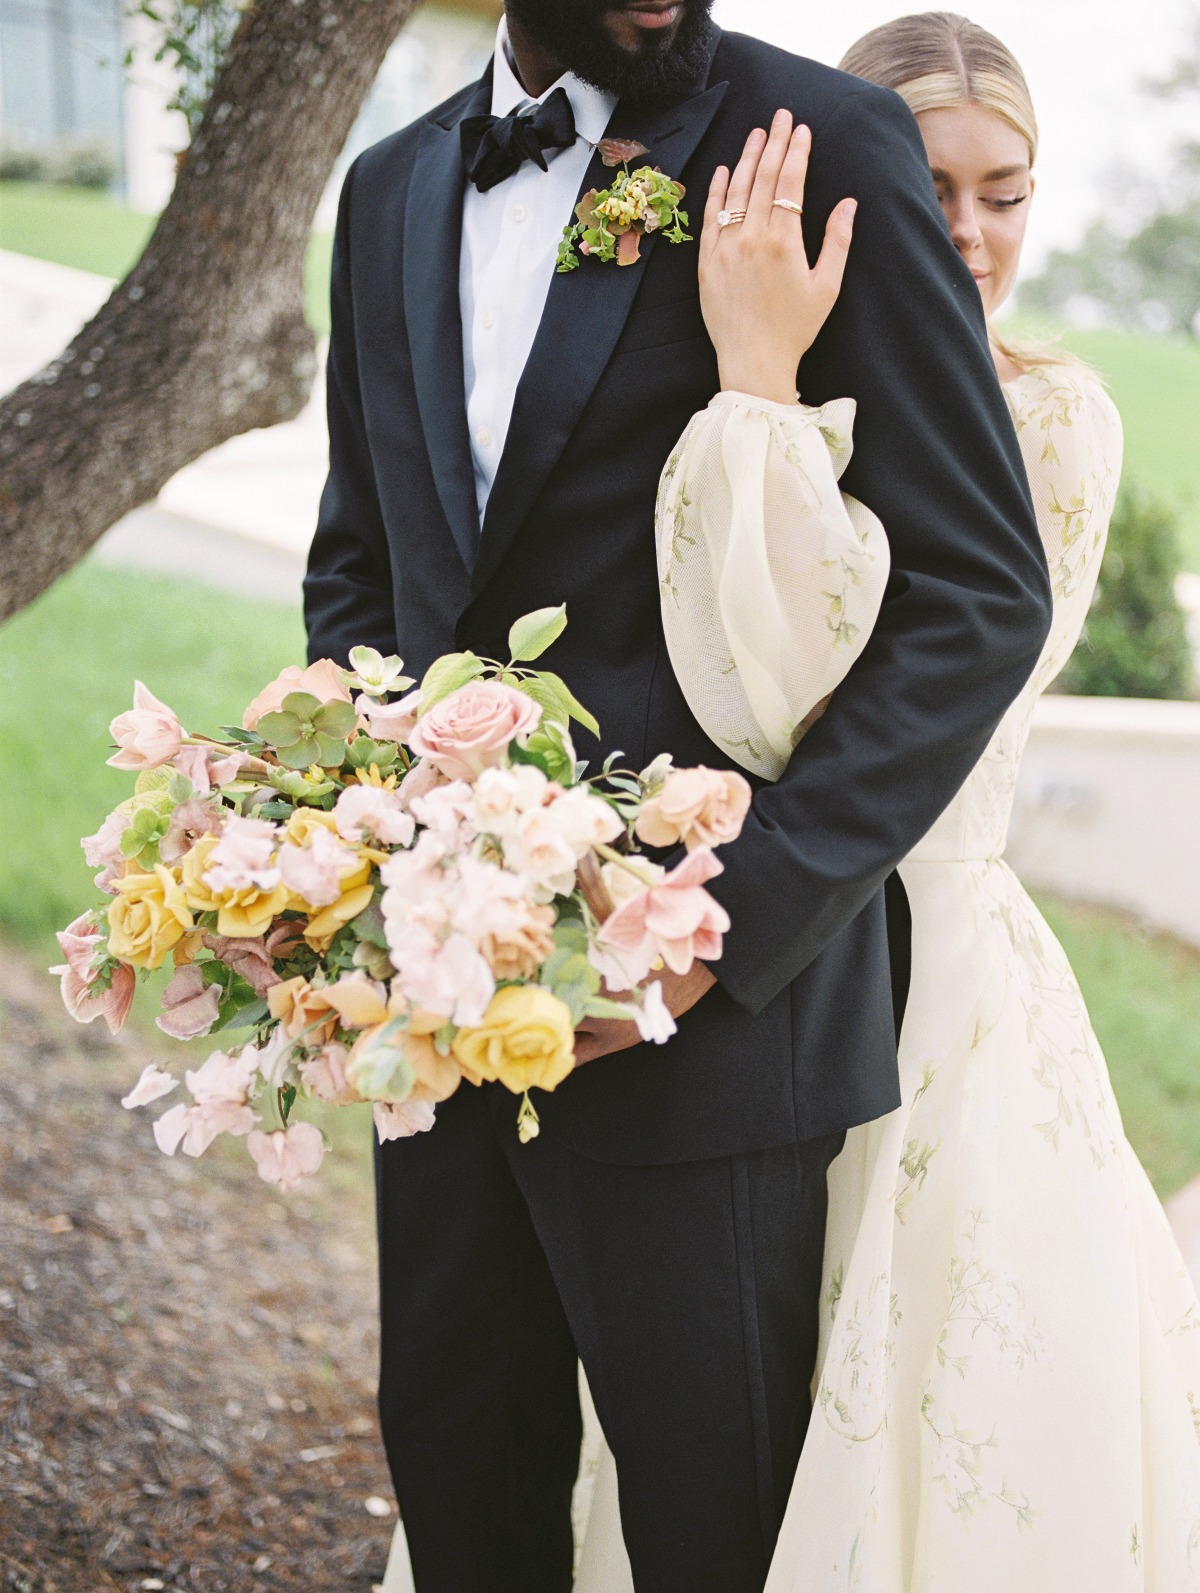 Bride hugging groom from behind while groom holds bouquet